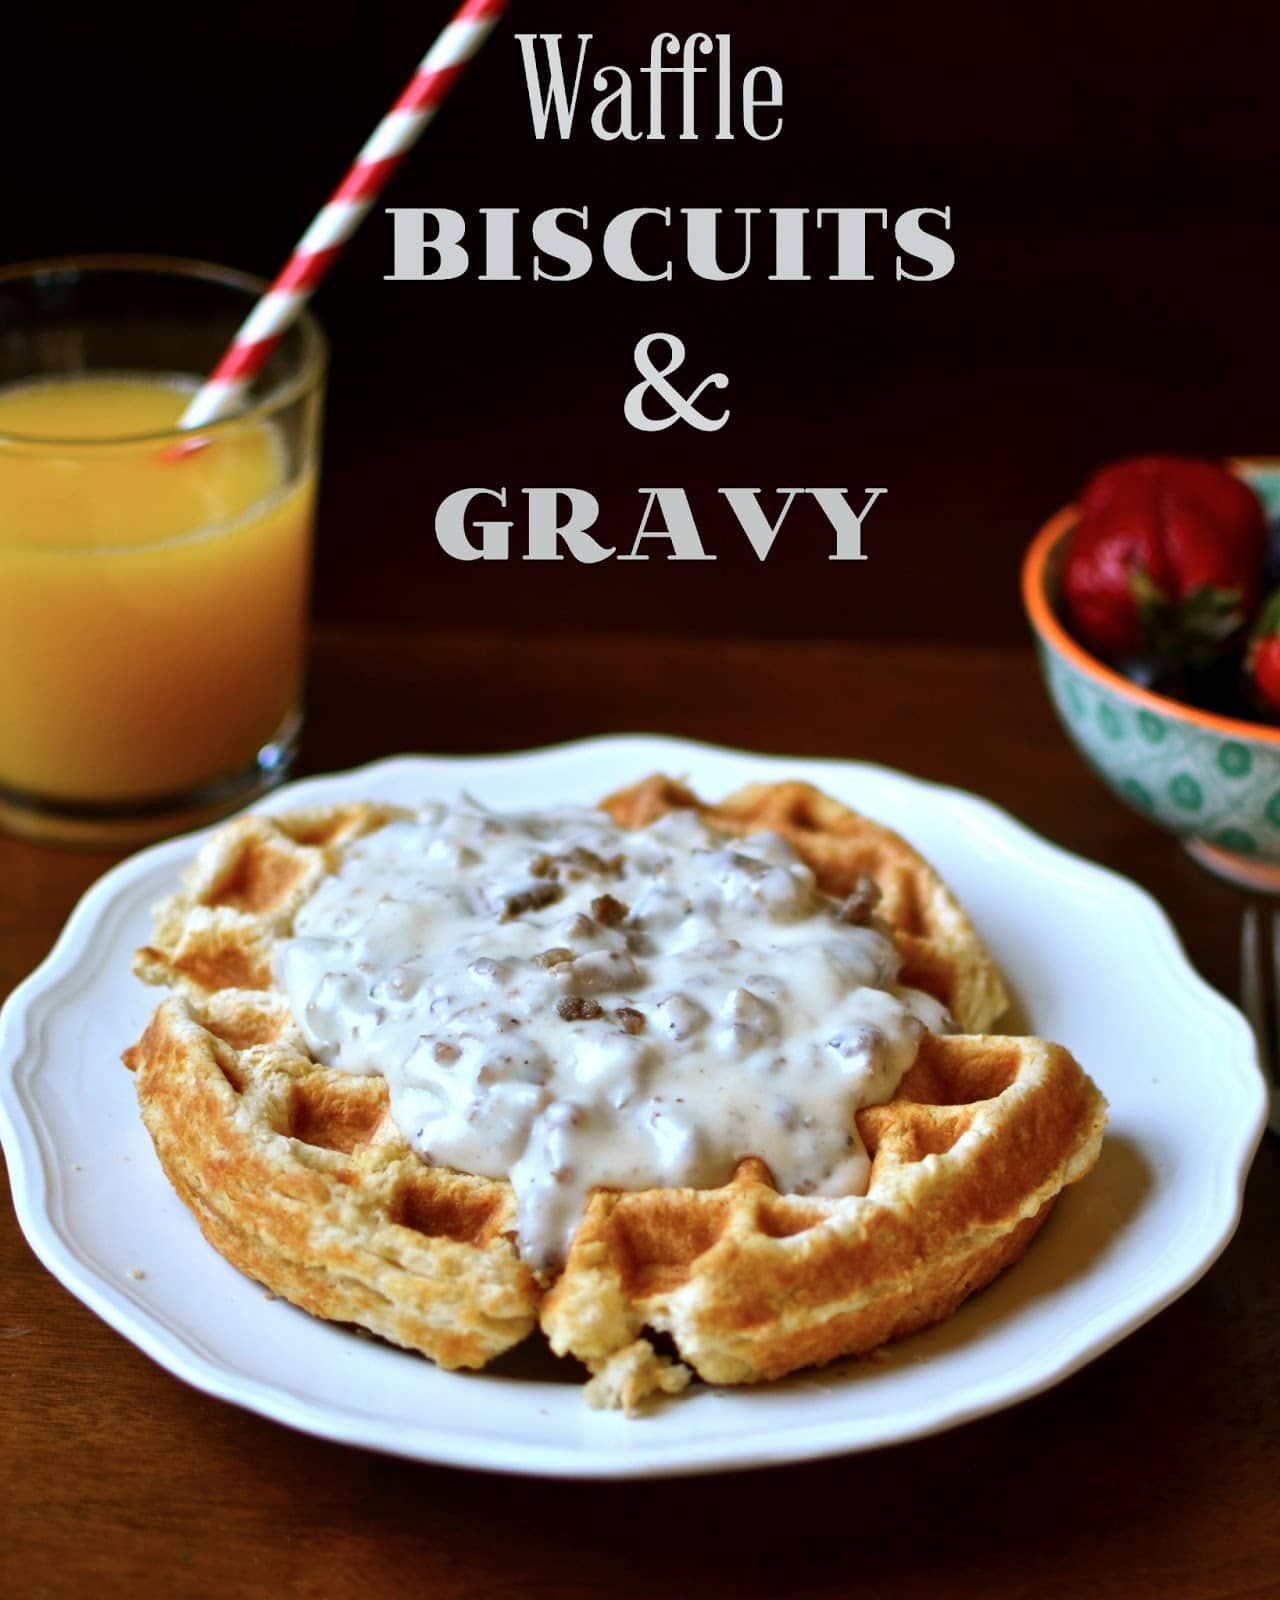 Waffle biscuit and gravy